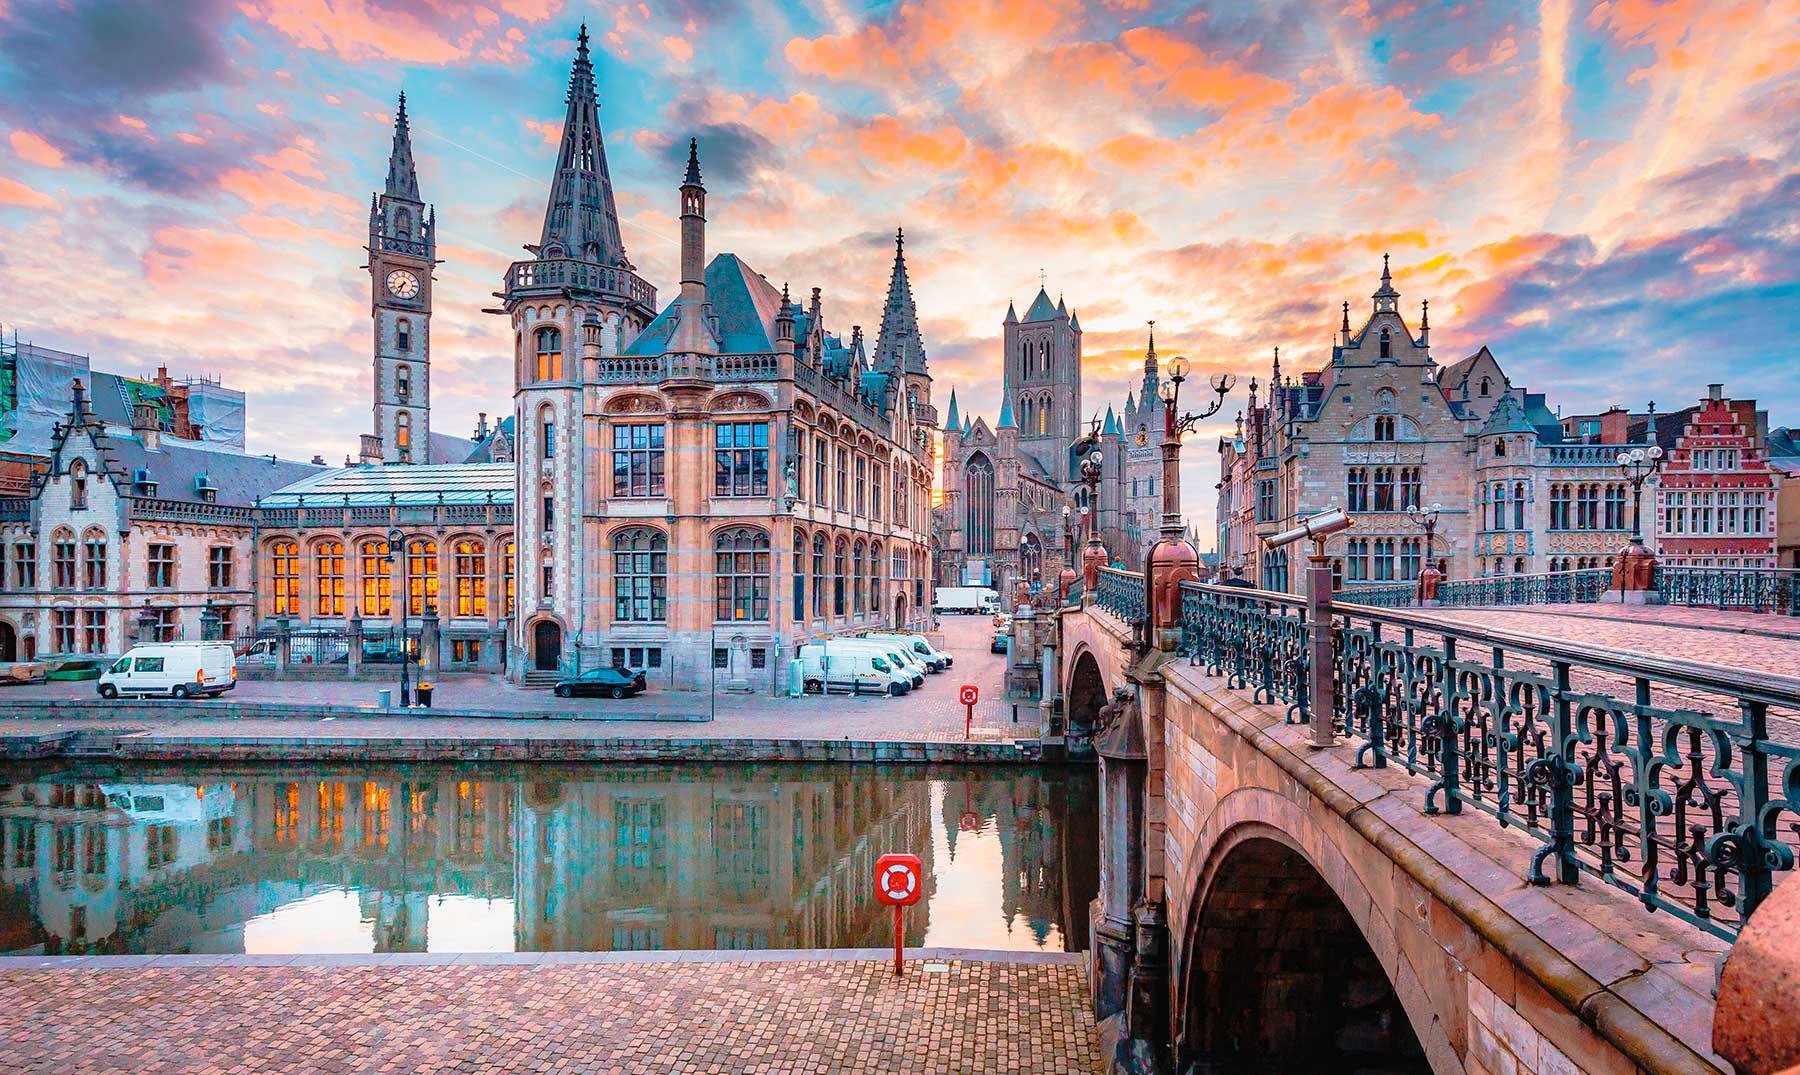 Private Tour to Ghent with transportation